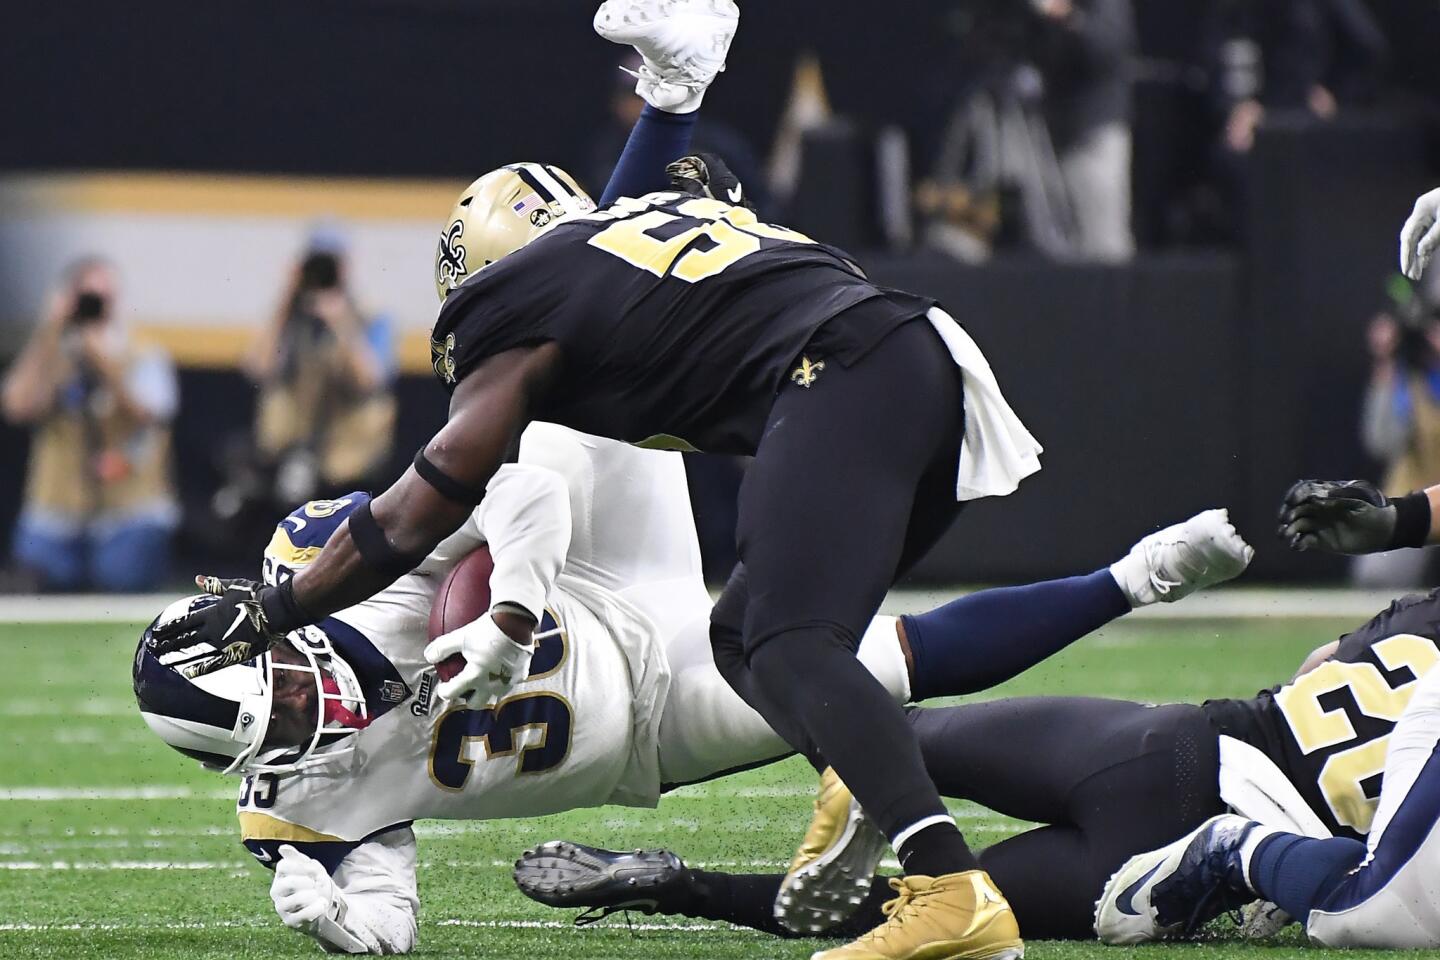 Rams running back C.J. Anderson is upended by the New Orleans Saints defense in the third quarter in the NFC Championship at the Superdome in New Orleans Sunday.